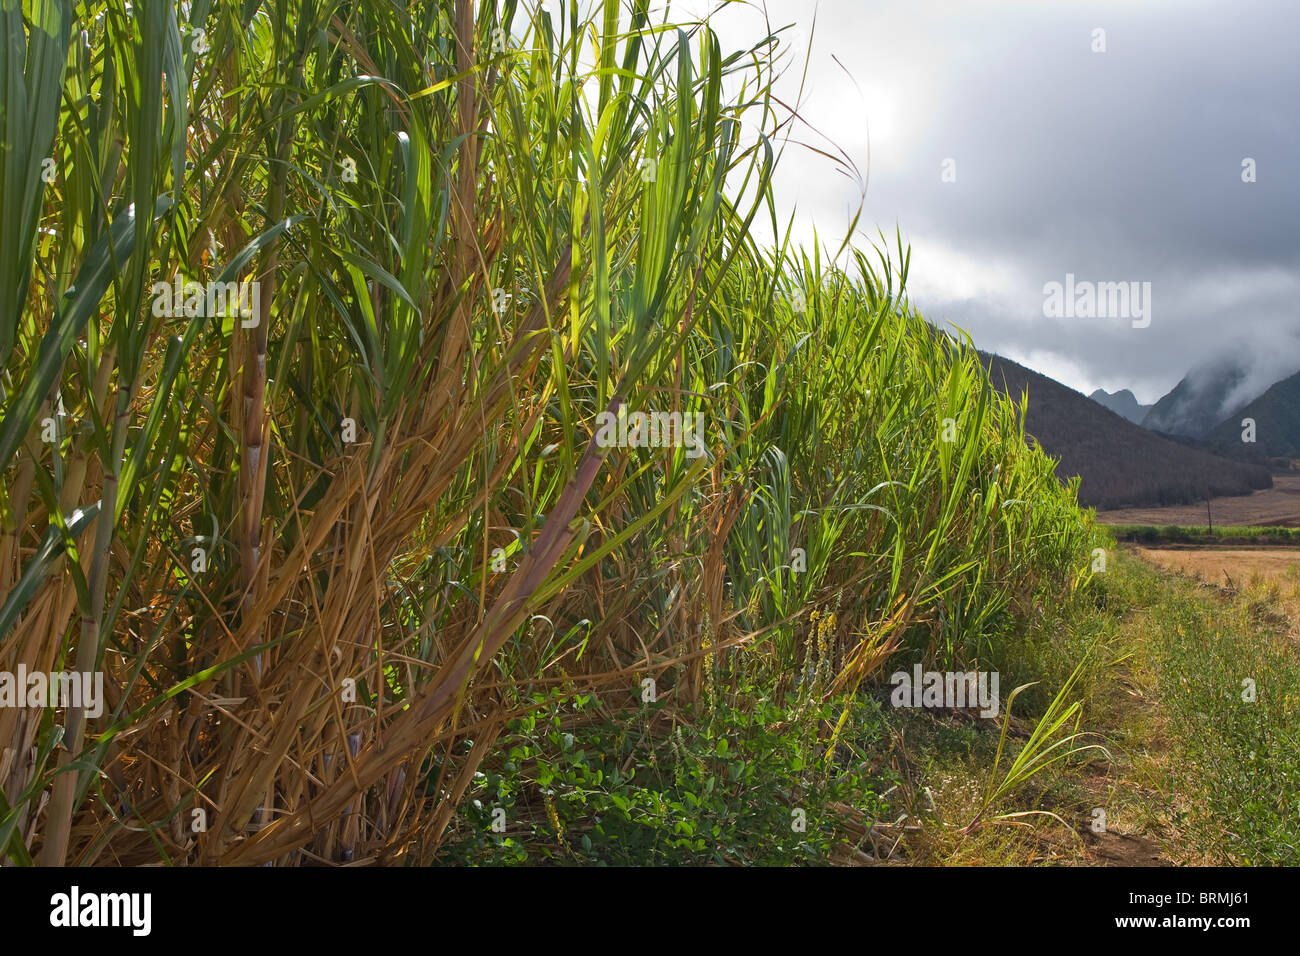 Large sugar cane plantation with cloudy sky Stock Photo